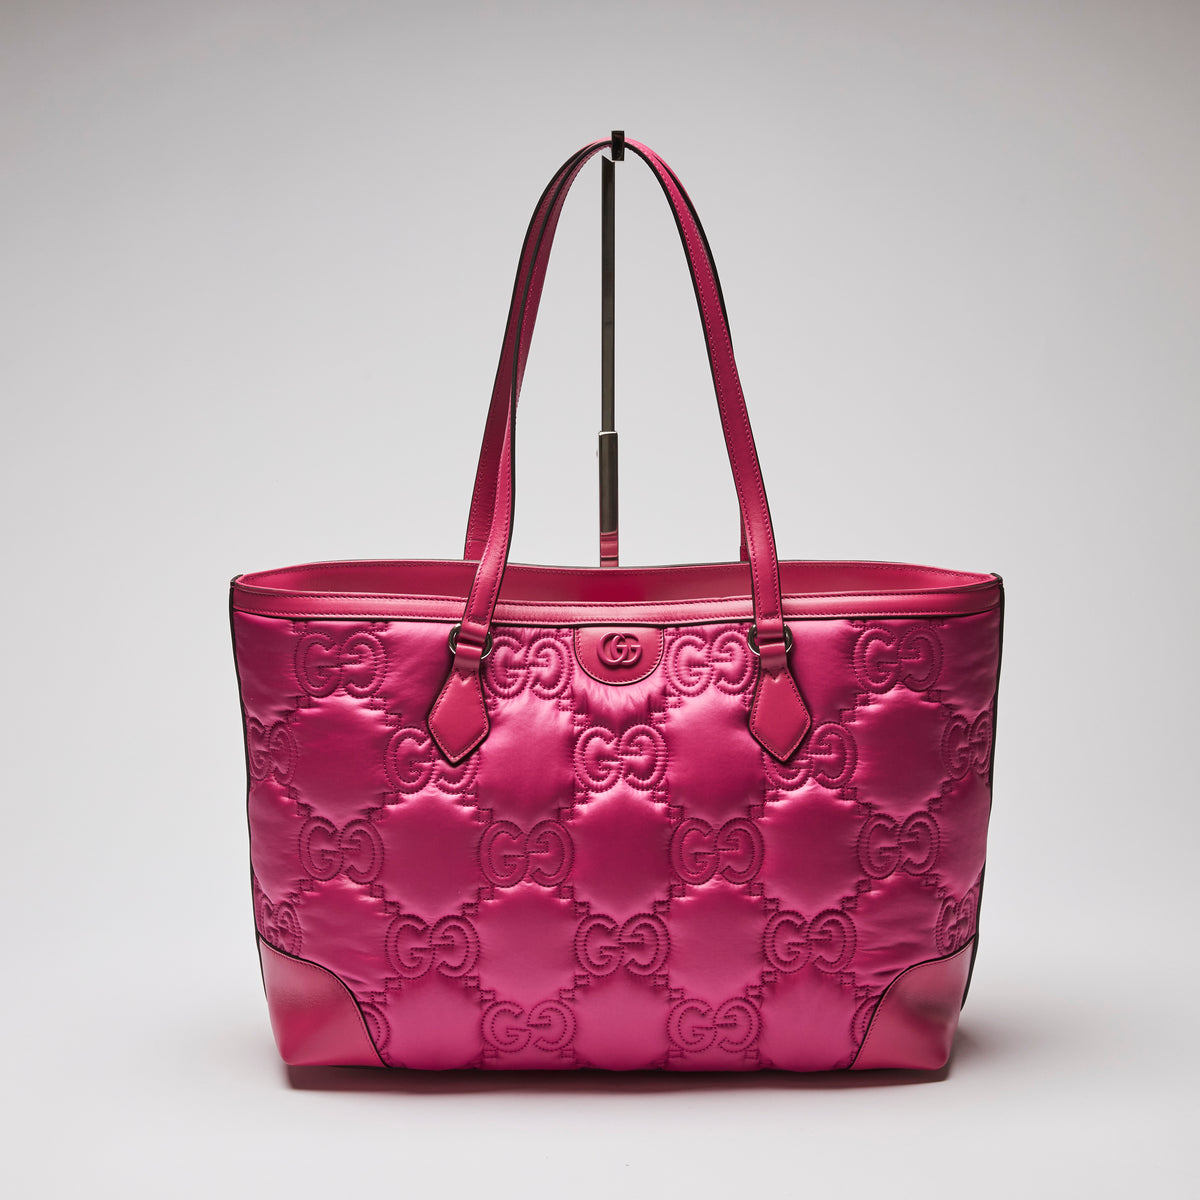 Excellent Pre-Loved Bright Pink Nylon and Leather Tote Bag.  (front)